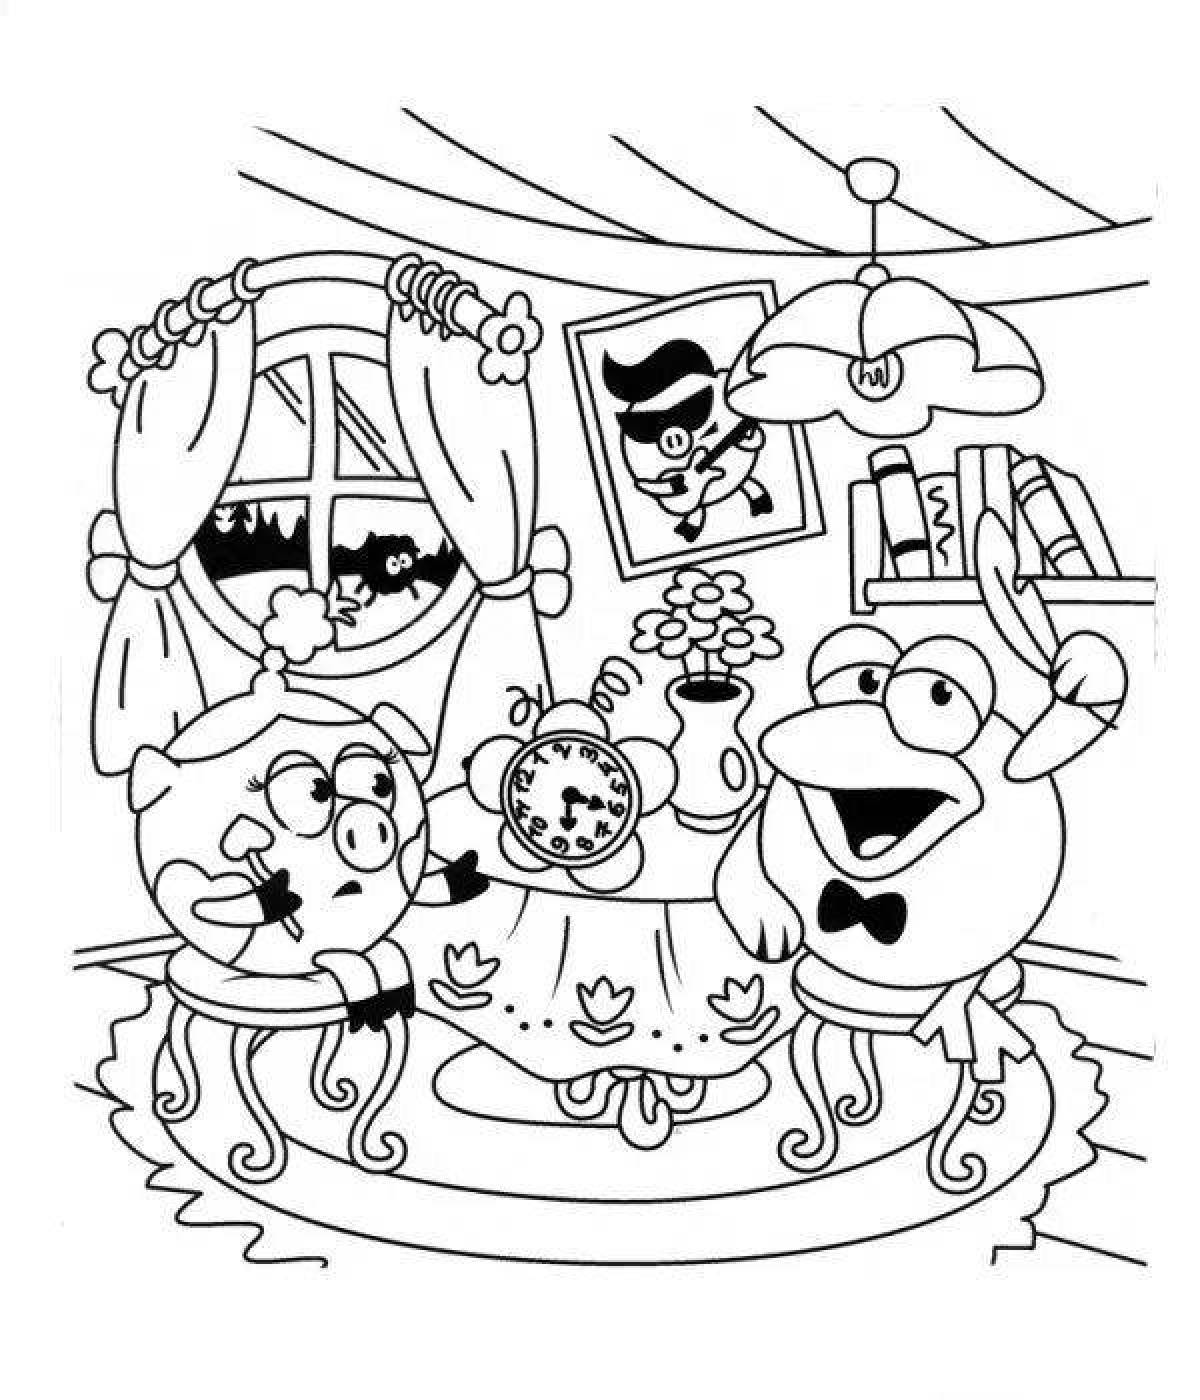 Coloring pages-all smeshariki have fun together coloring book